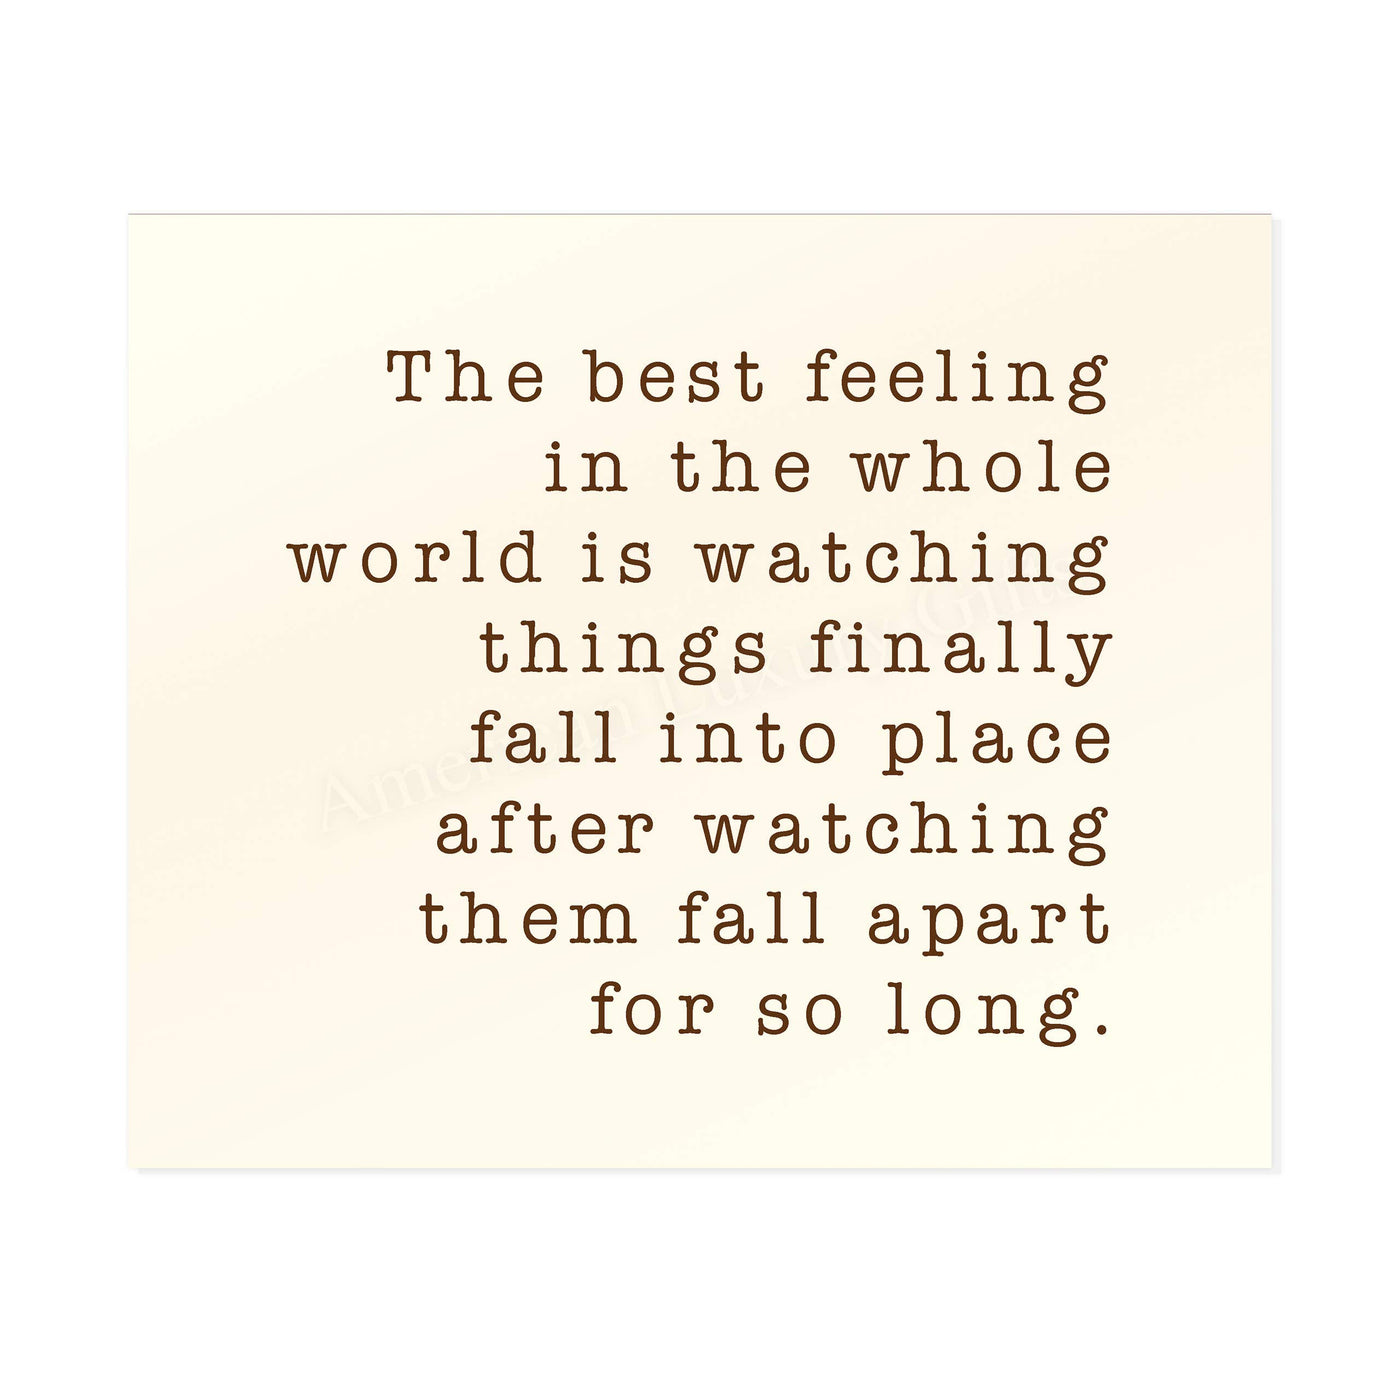 Best Feeling In Whole World-Watching Things Fall Into Place Inspirational Life Quotes -10 x 8" Motivational Wall Art Print-Ready to Frame. Home-Office-Studio-Dorm Decor. Great Sign for Inspiration!